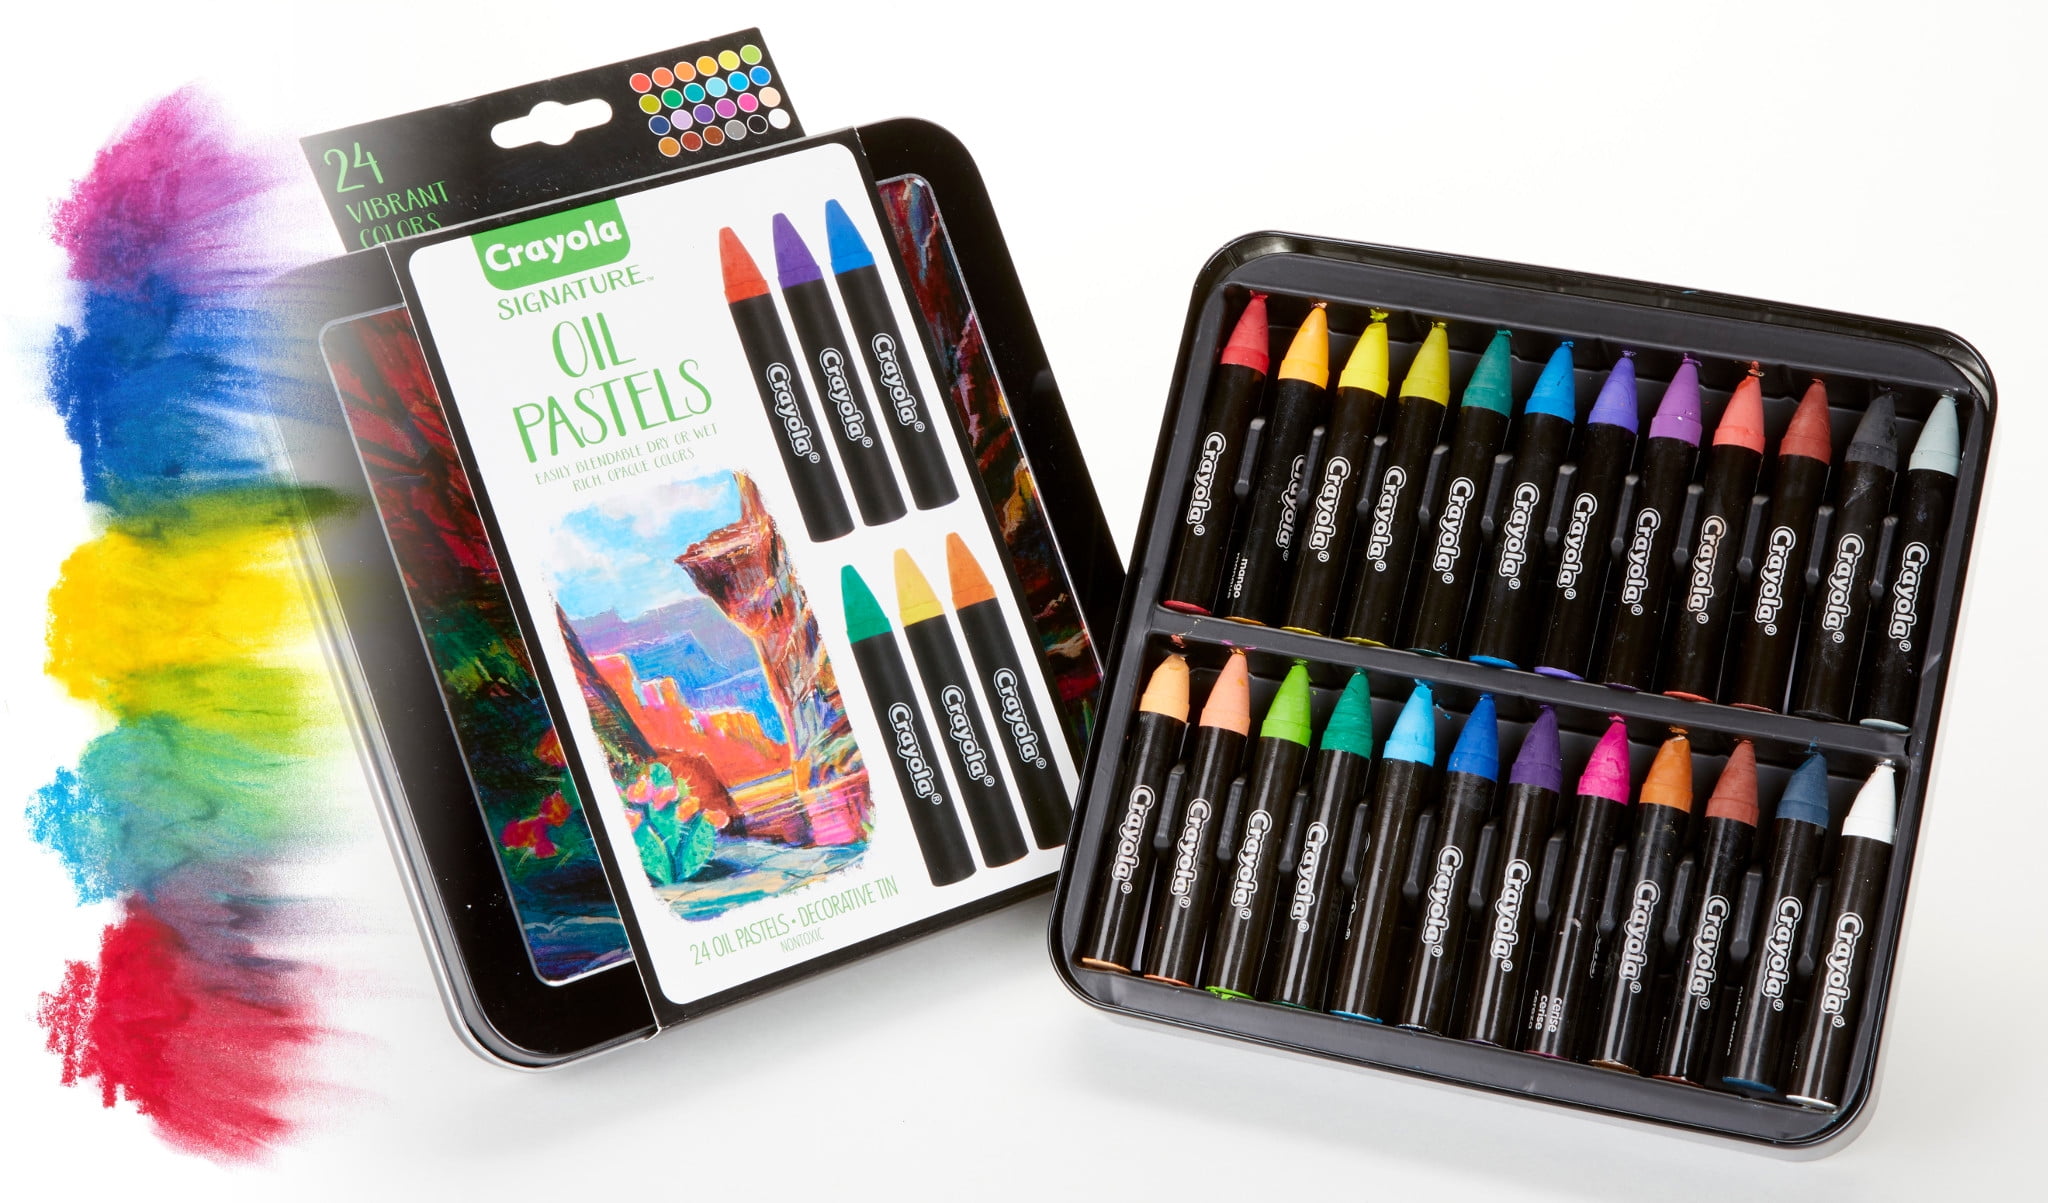 Crayola - Unbox your brilliant colored Crayola Oil Pastels apply